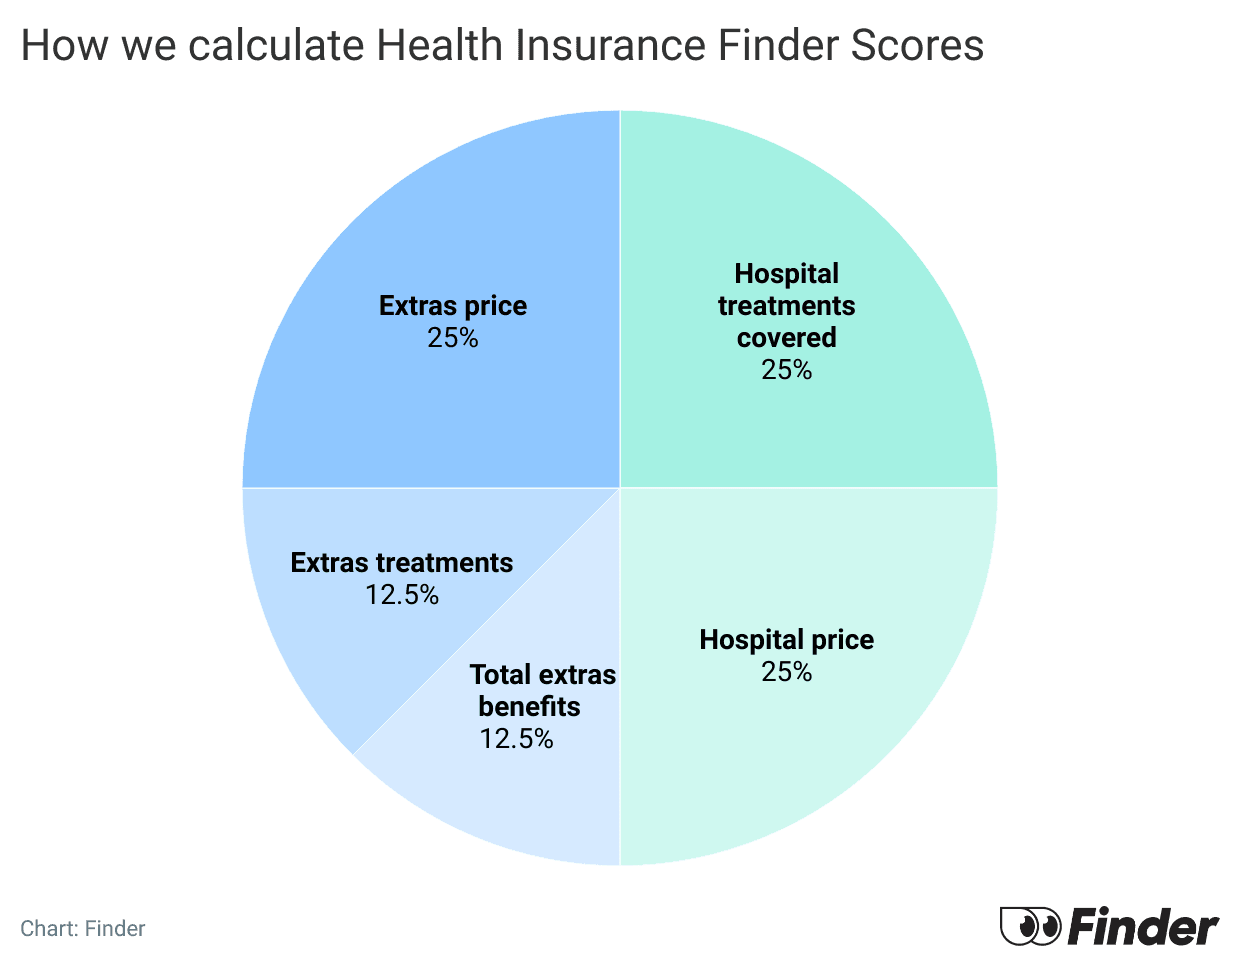 How we calculate health insurance finder score